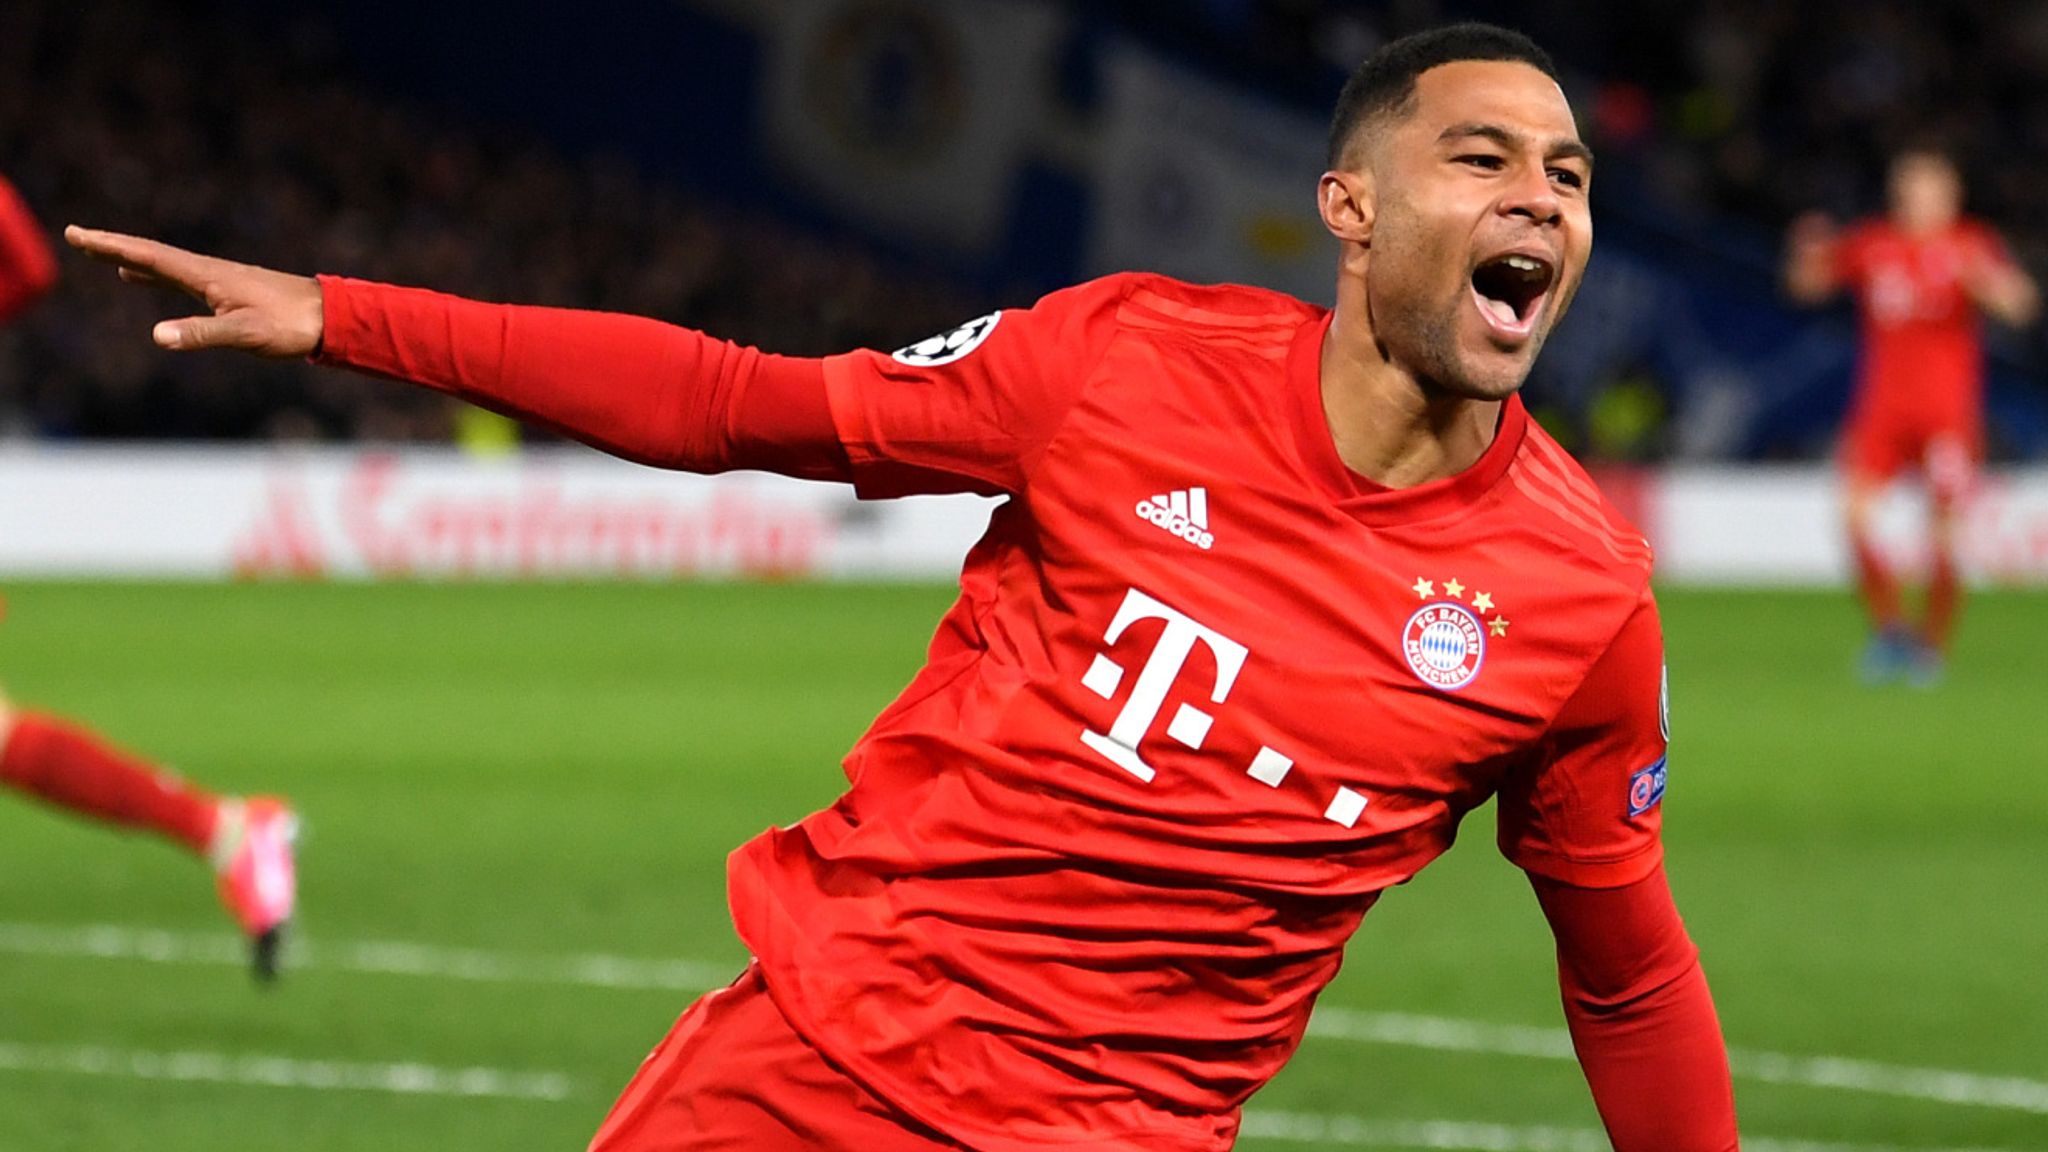  Serge Gnabry celebrates scoring a goal for Bayern Munich against Arsenal in the Champions League.